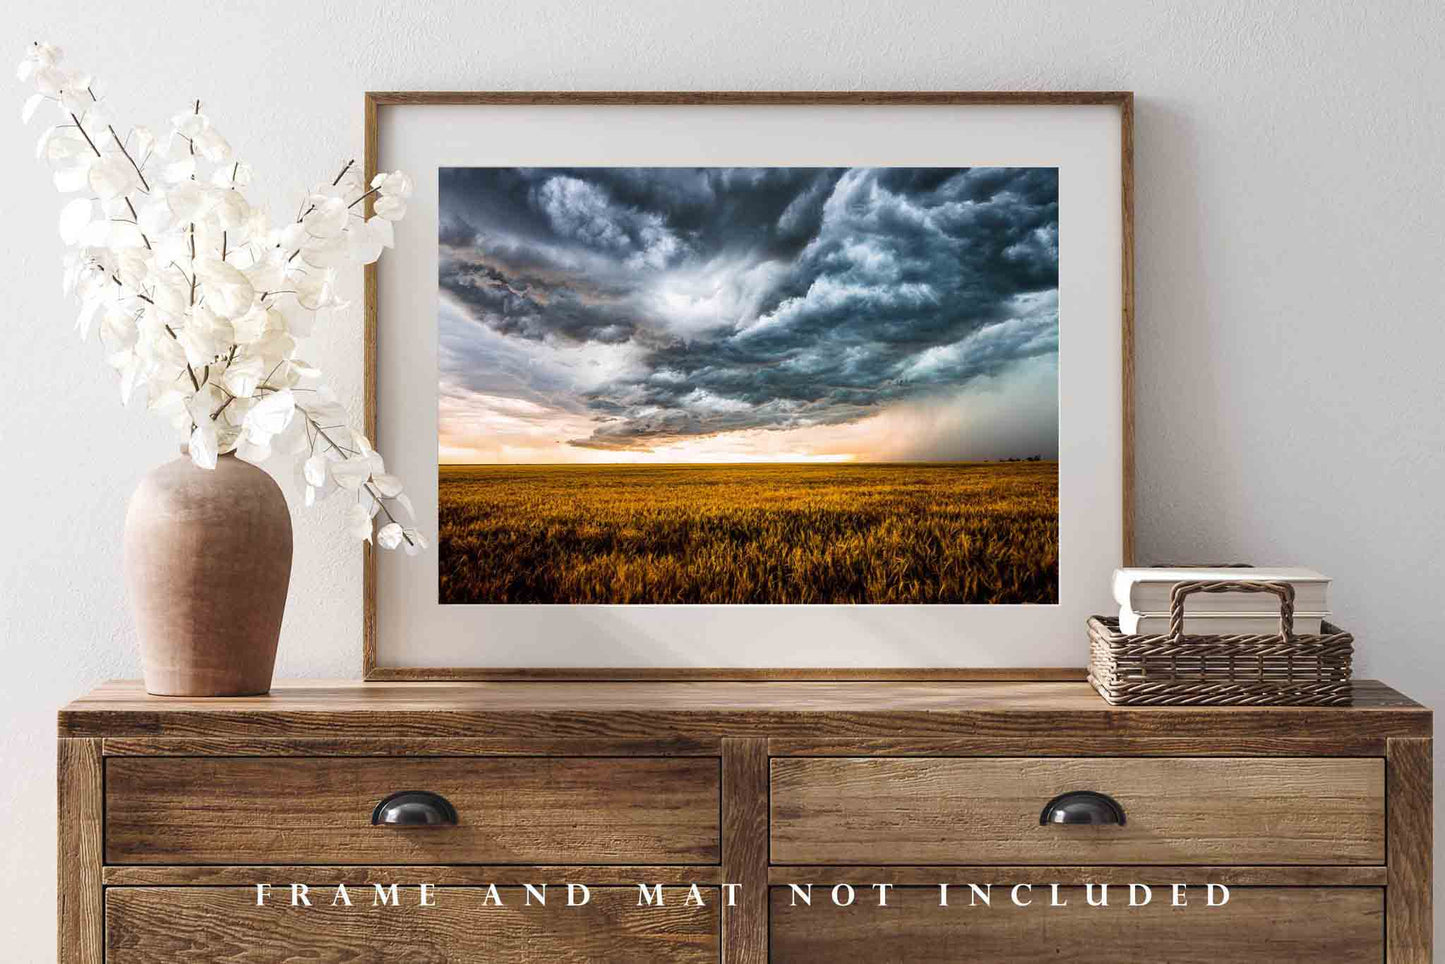 Western Wall Art - Picture of Storm Clouds Churning Over Wheat Field in Colorado - Landscape Photography Photo Print Artwork Decor